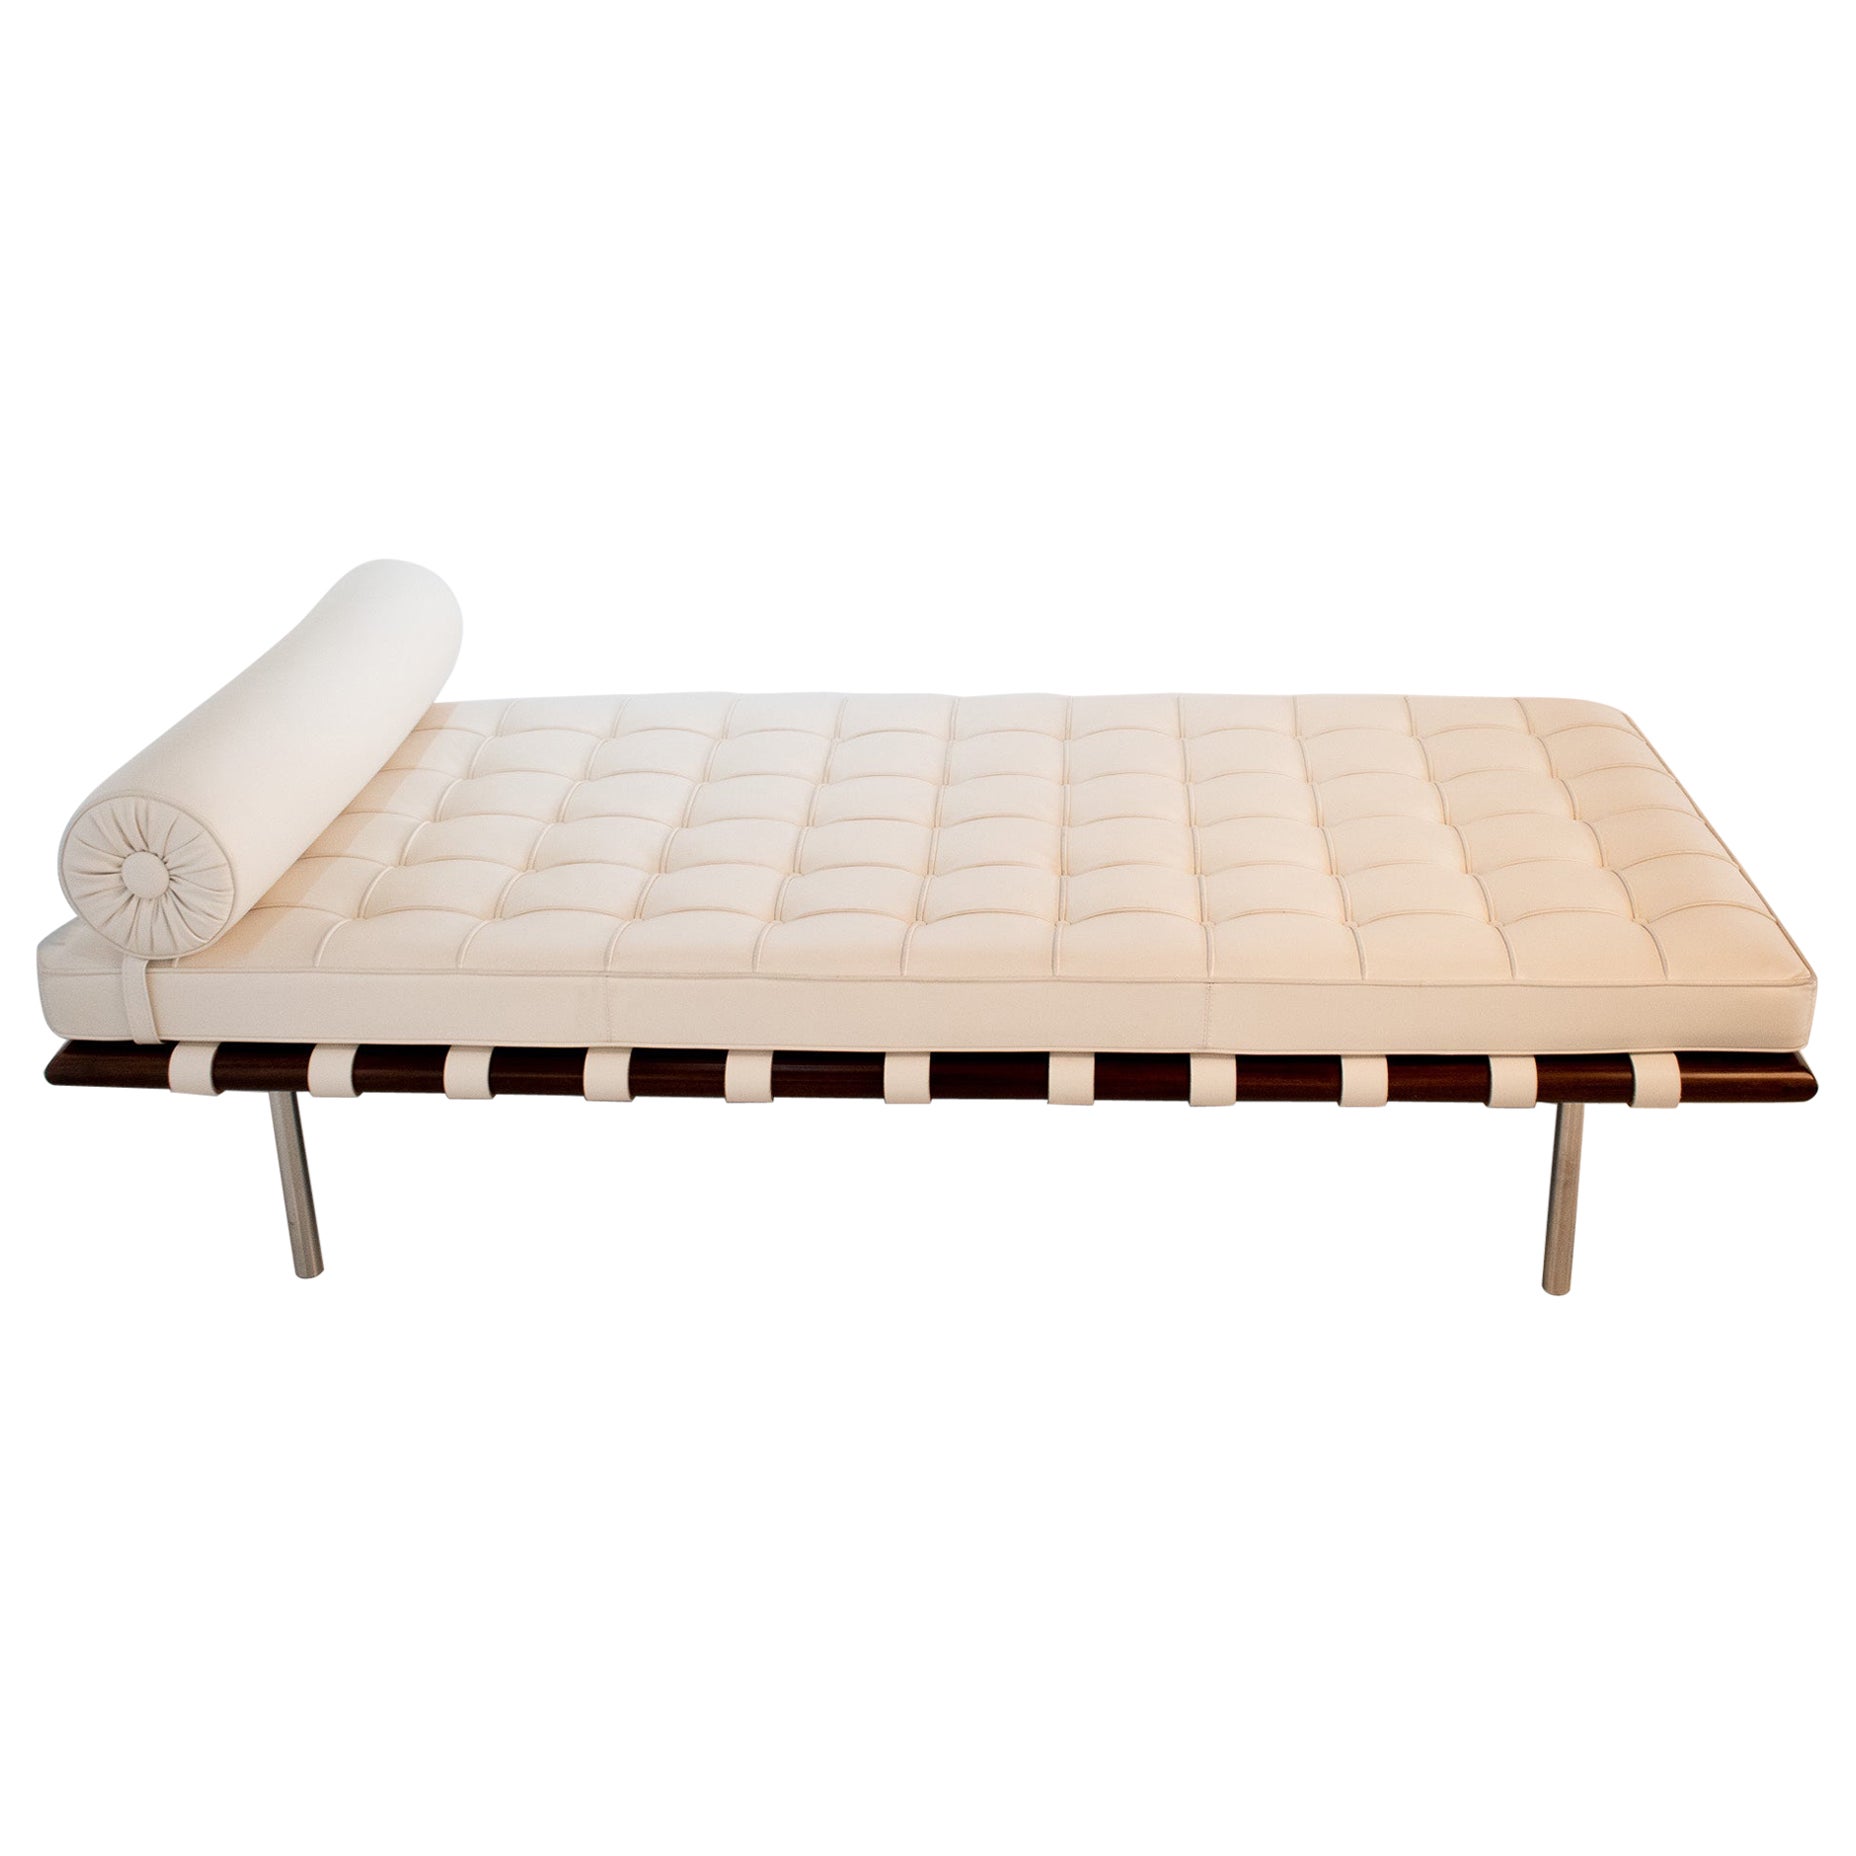 Barcelona Day Bed by Mies van der Rohe for Knoll Studio Cream Leather